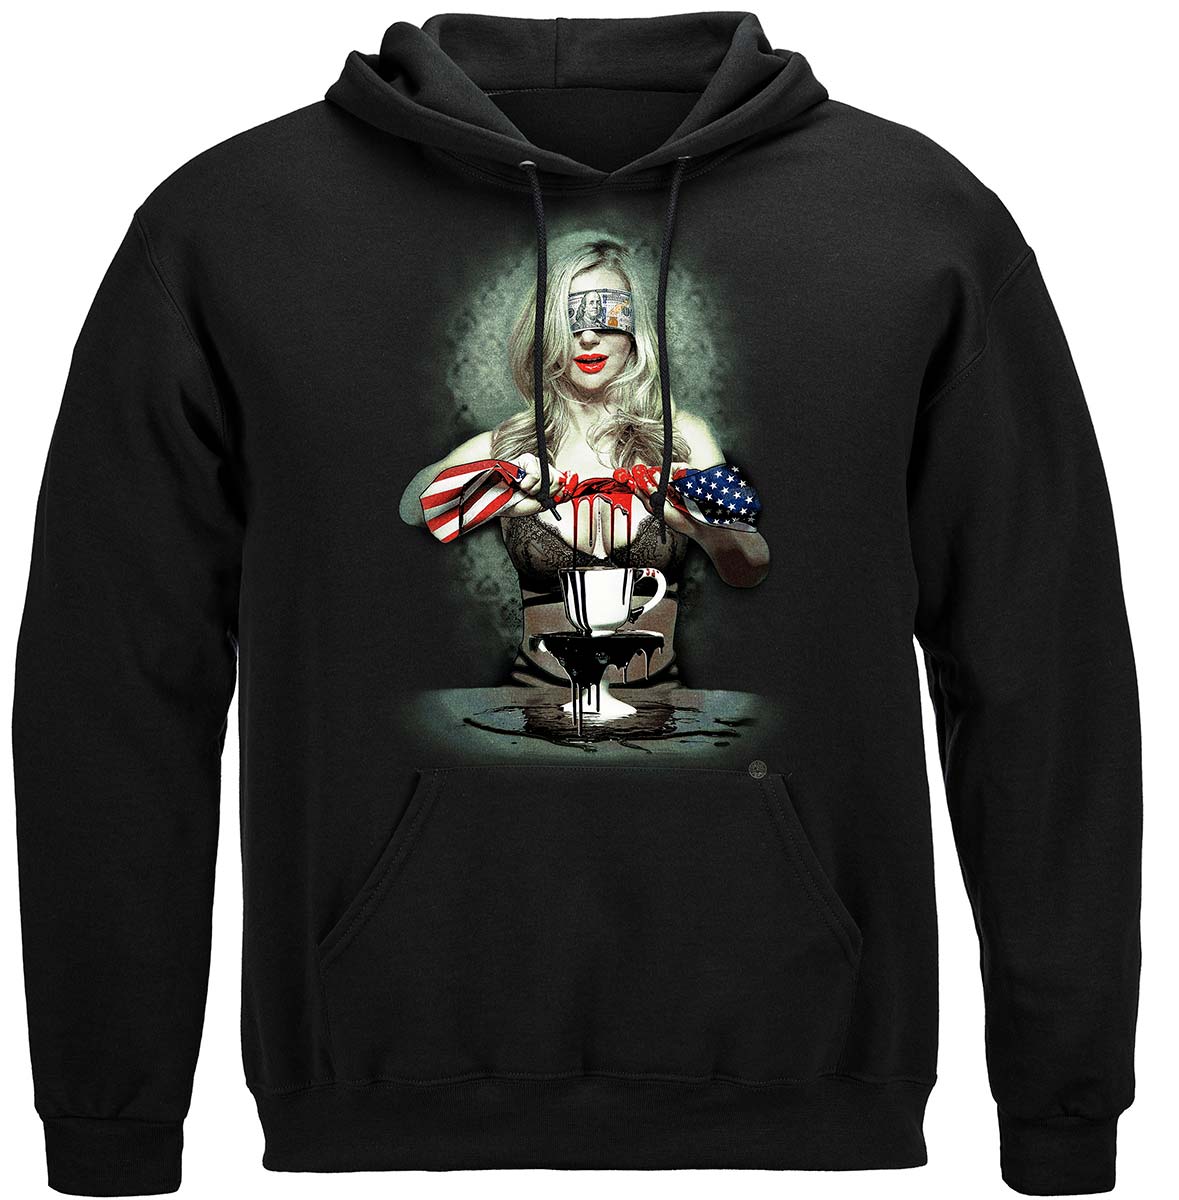 Blood For Oil Premium Hooded Sweat Shirt